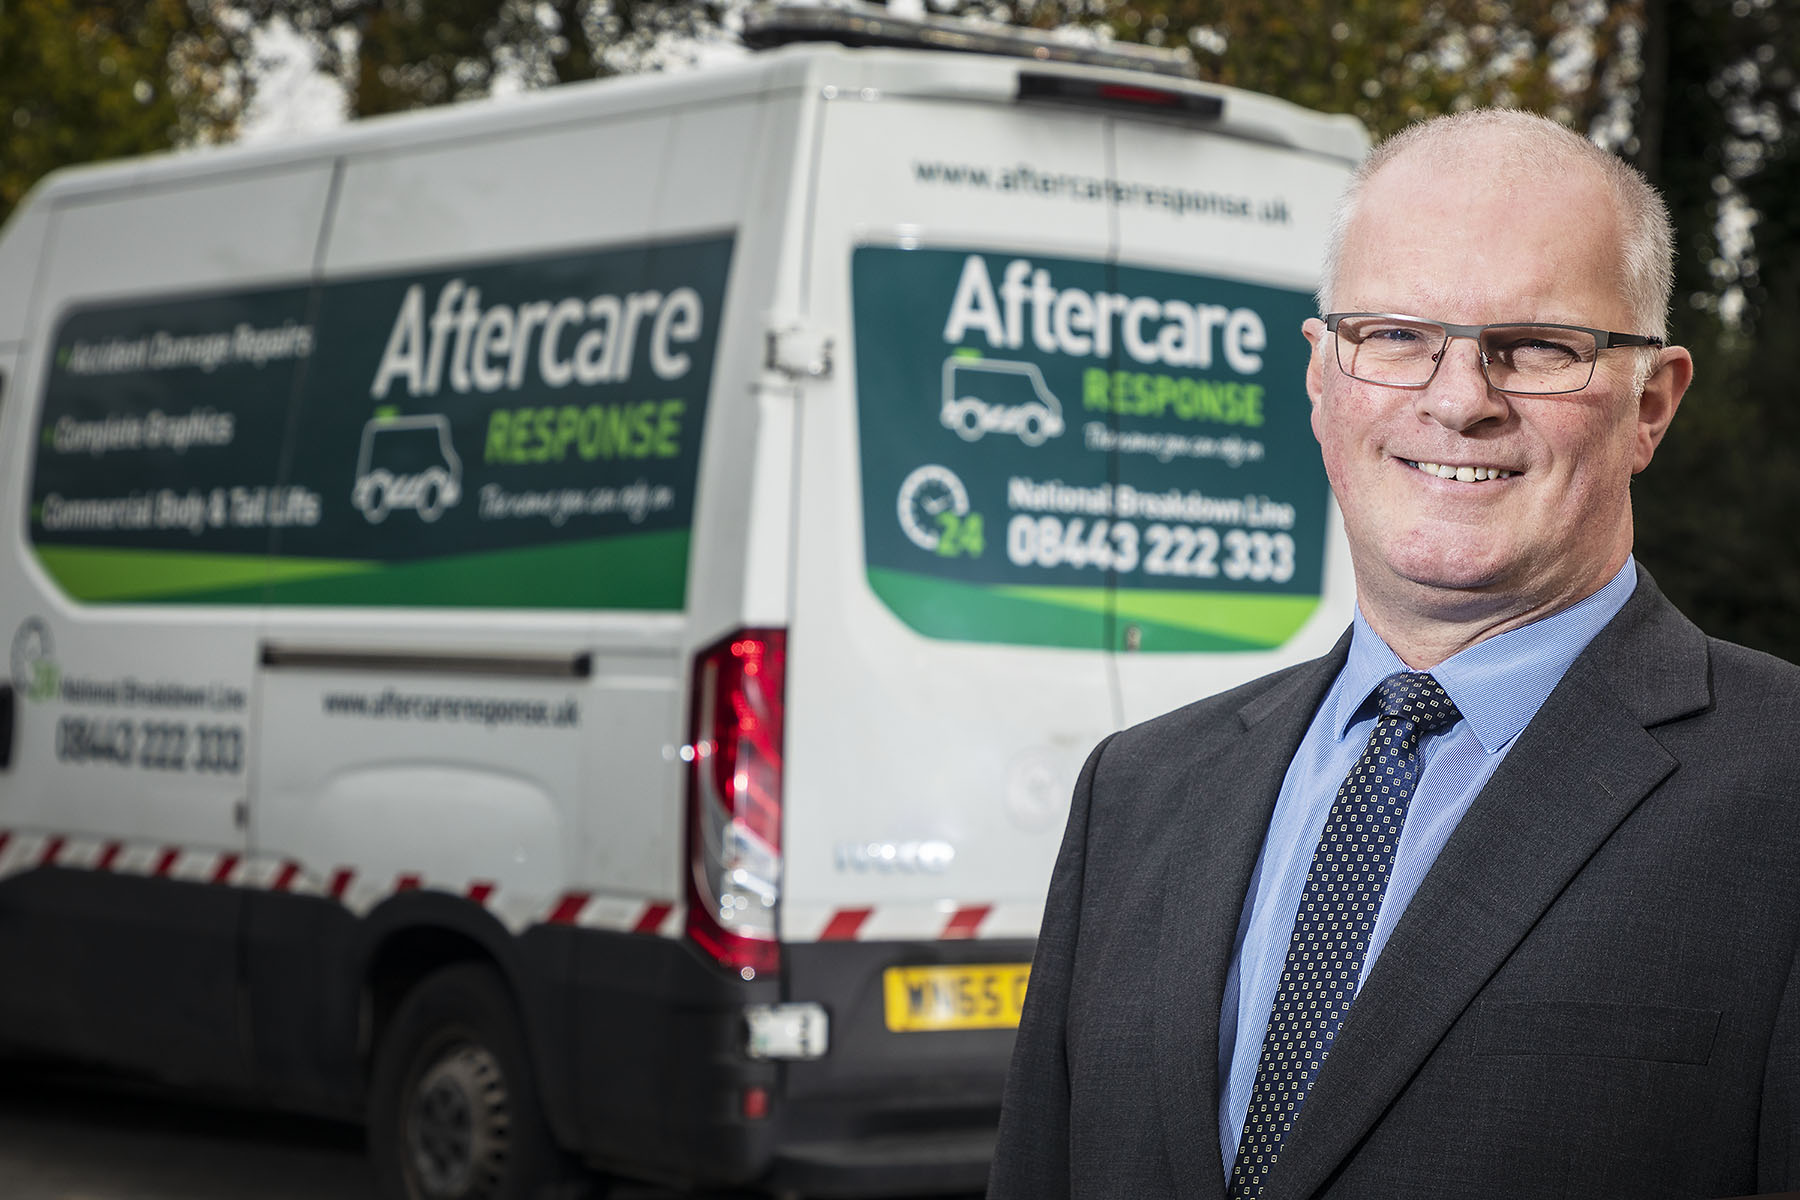 Andy brings a customer’s perspective to his new role at Aftercare Response